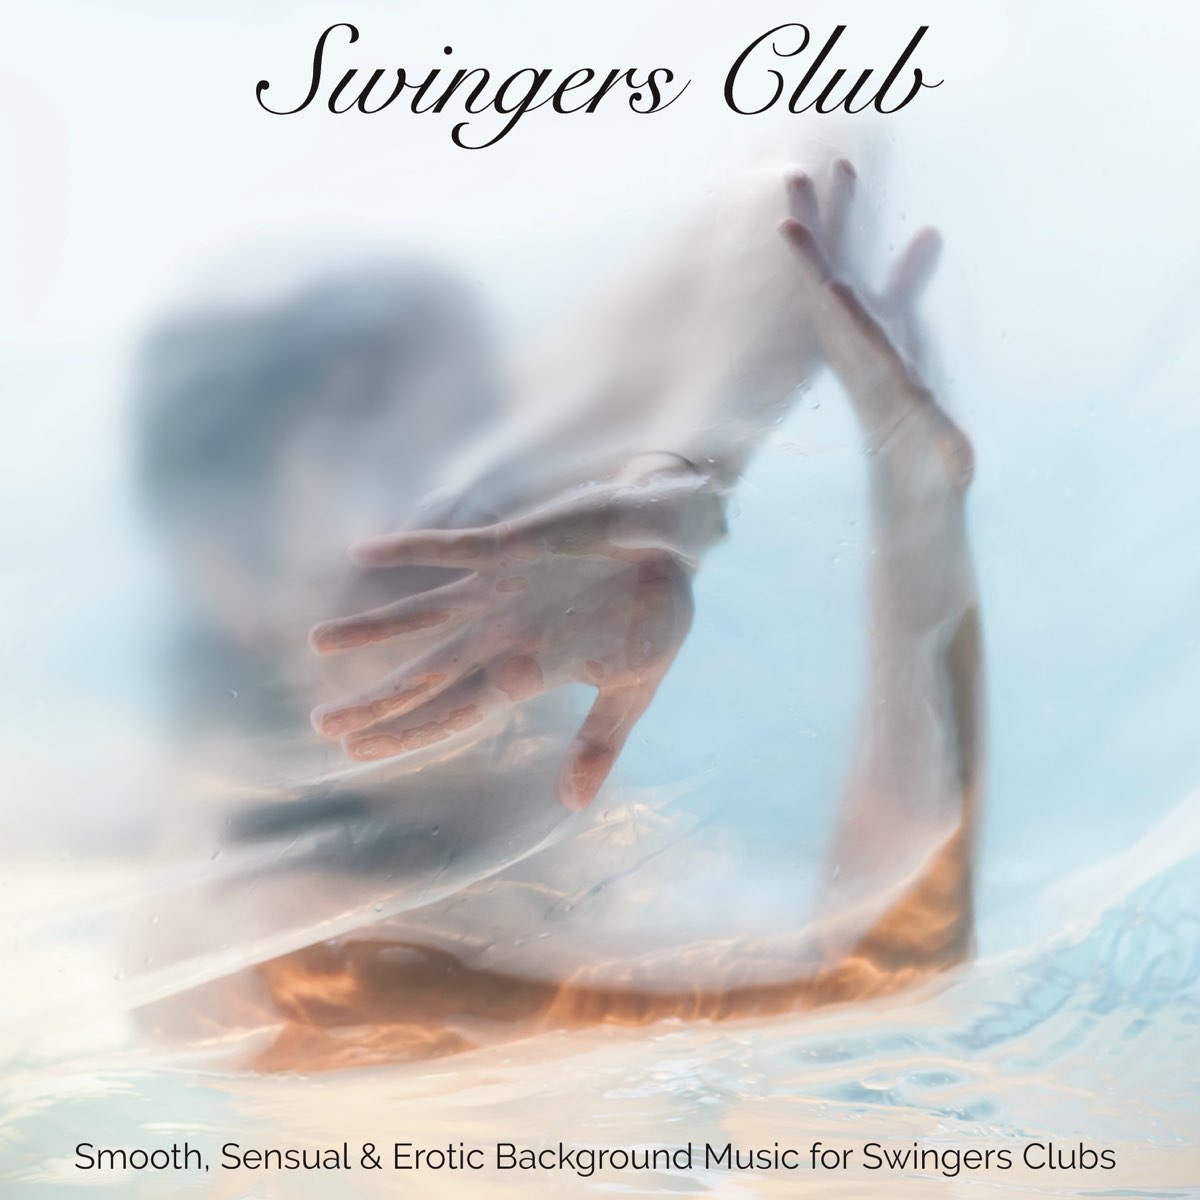 Swingers Club Smooth, Sensual and Erotic Background Music for Swingers Clubs by Erotic Lounge Buddha Chill Out Music Cafe on Apple Music picture